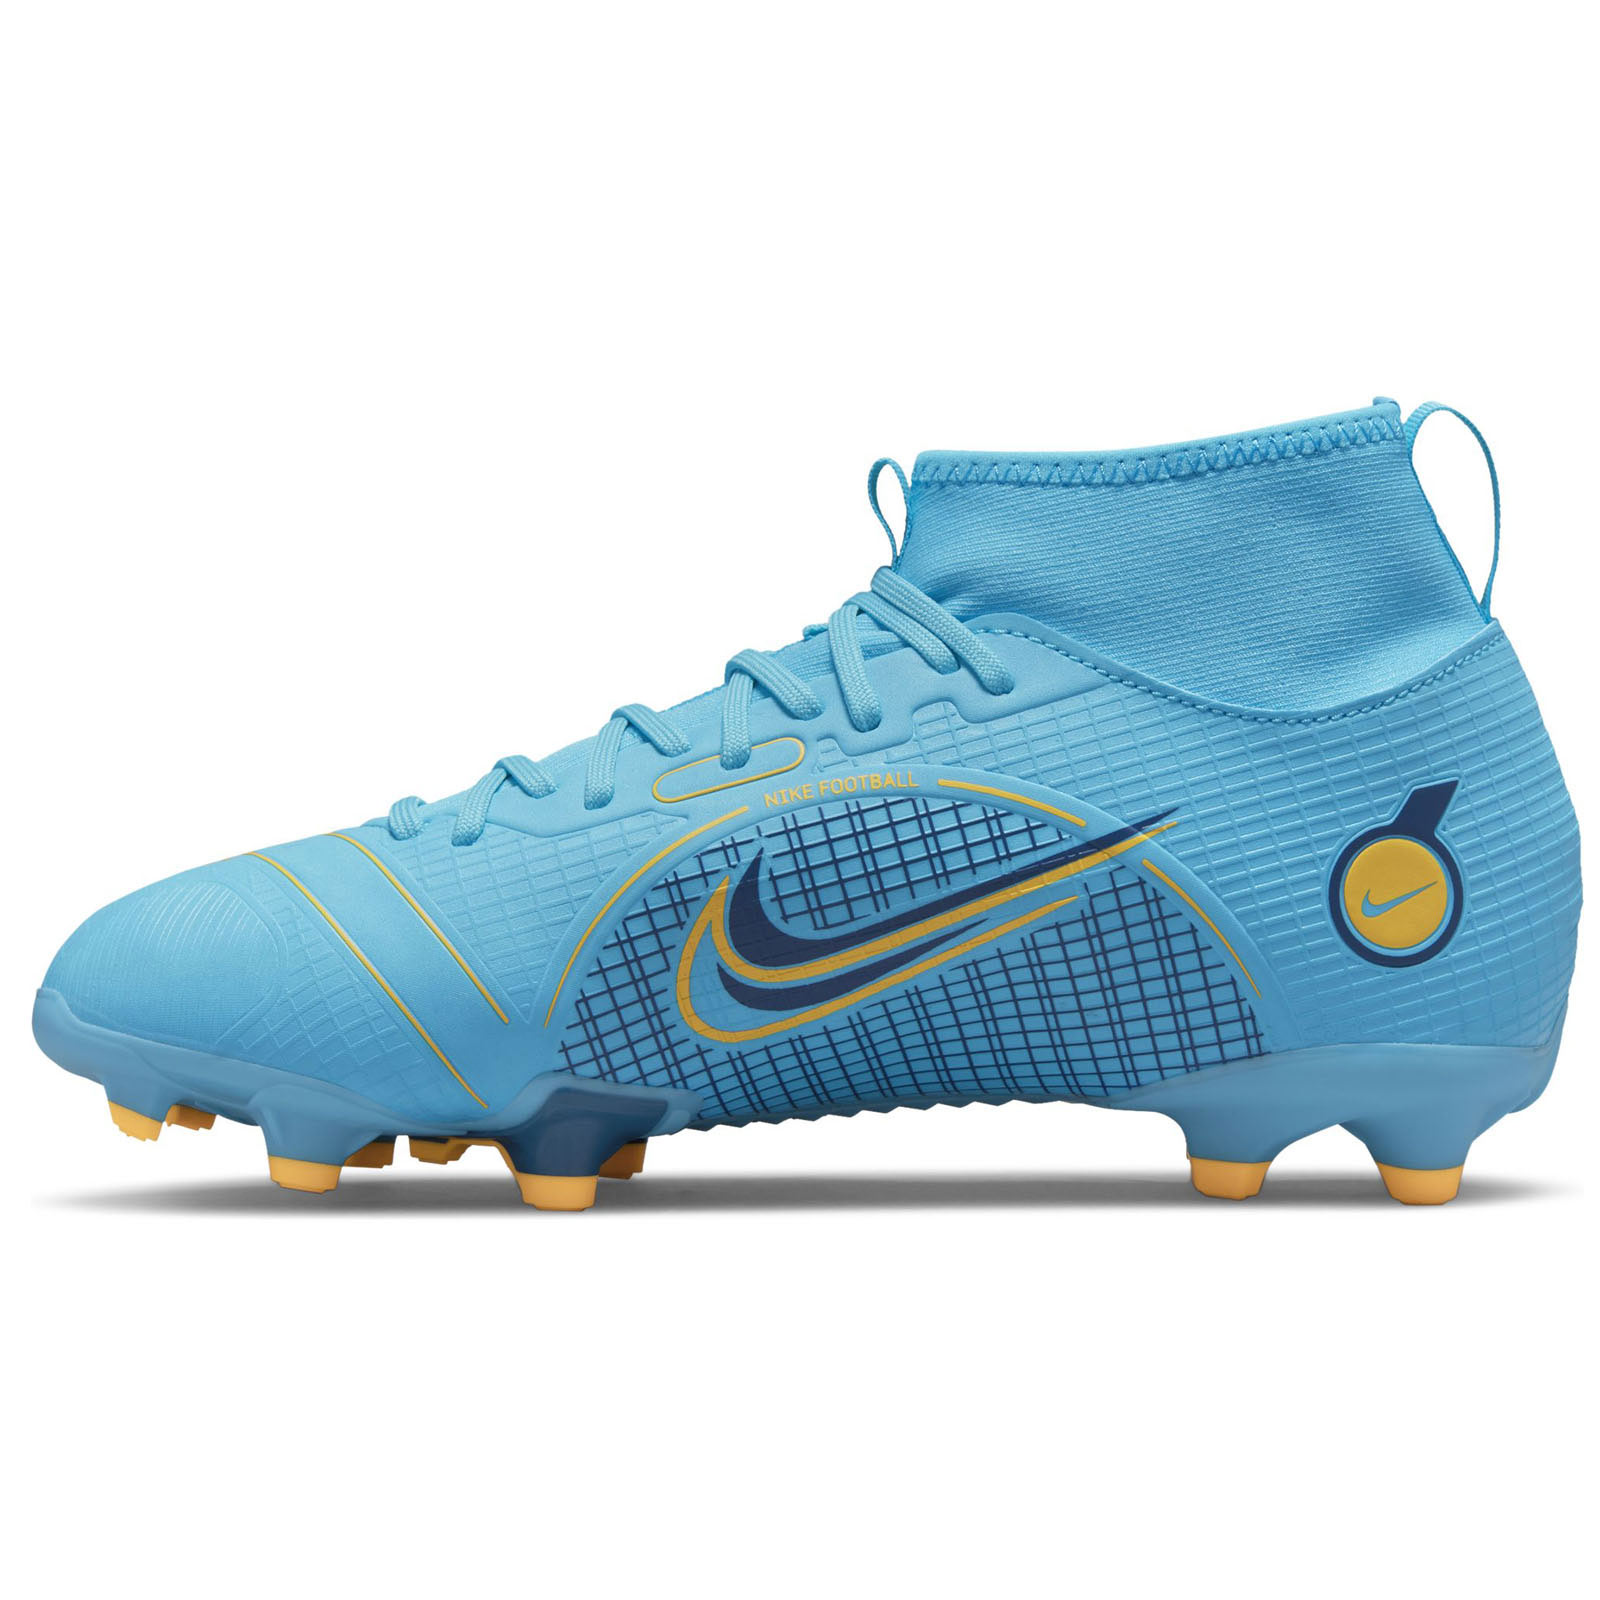 NIKE JR. MERCURIAL SUPERFLY 8 ACADEMY KIDS FIRM GROUND / MULTI-GROUND FOOTBALL BOOTS